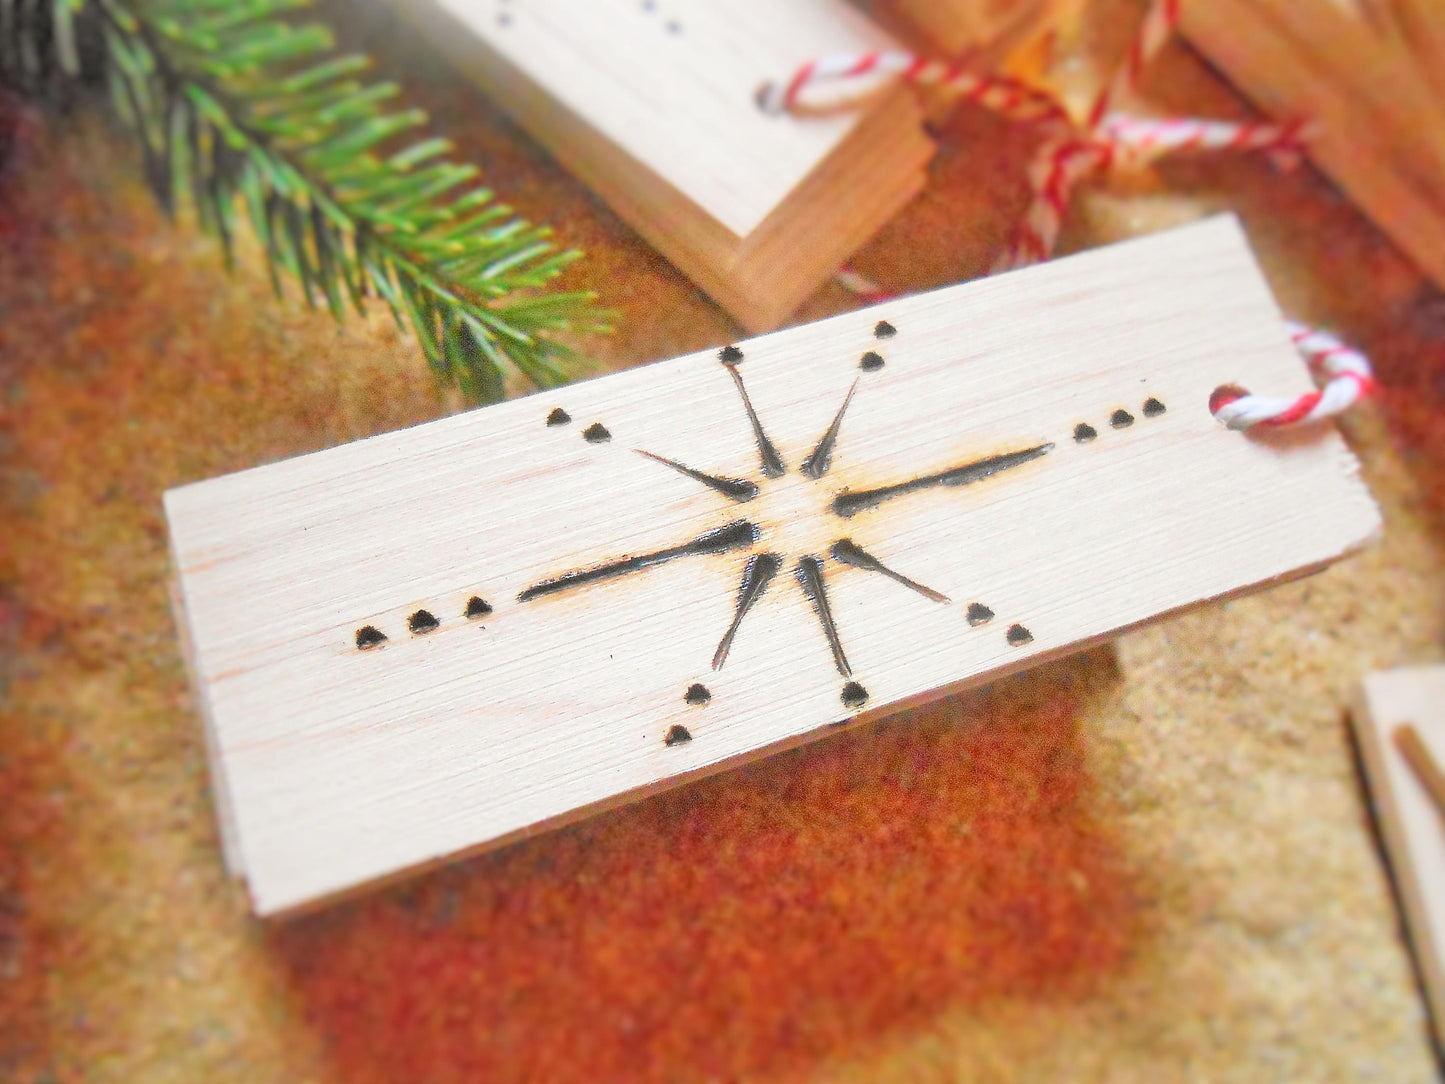 Wooden Gift Tags with Wood Burned Star Design